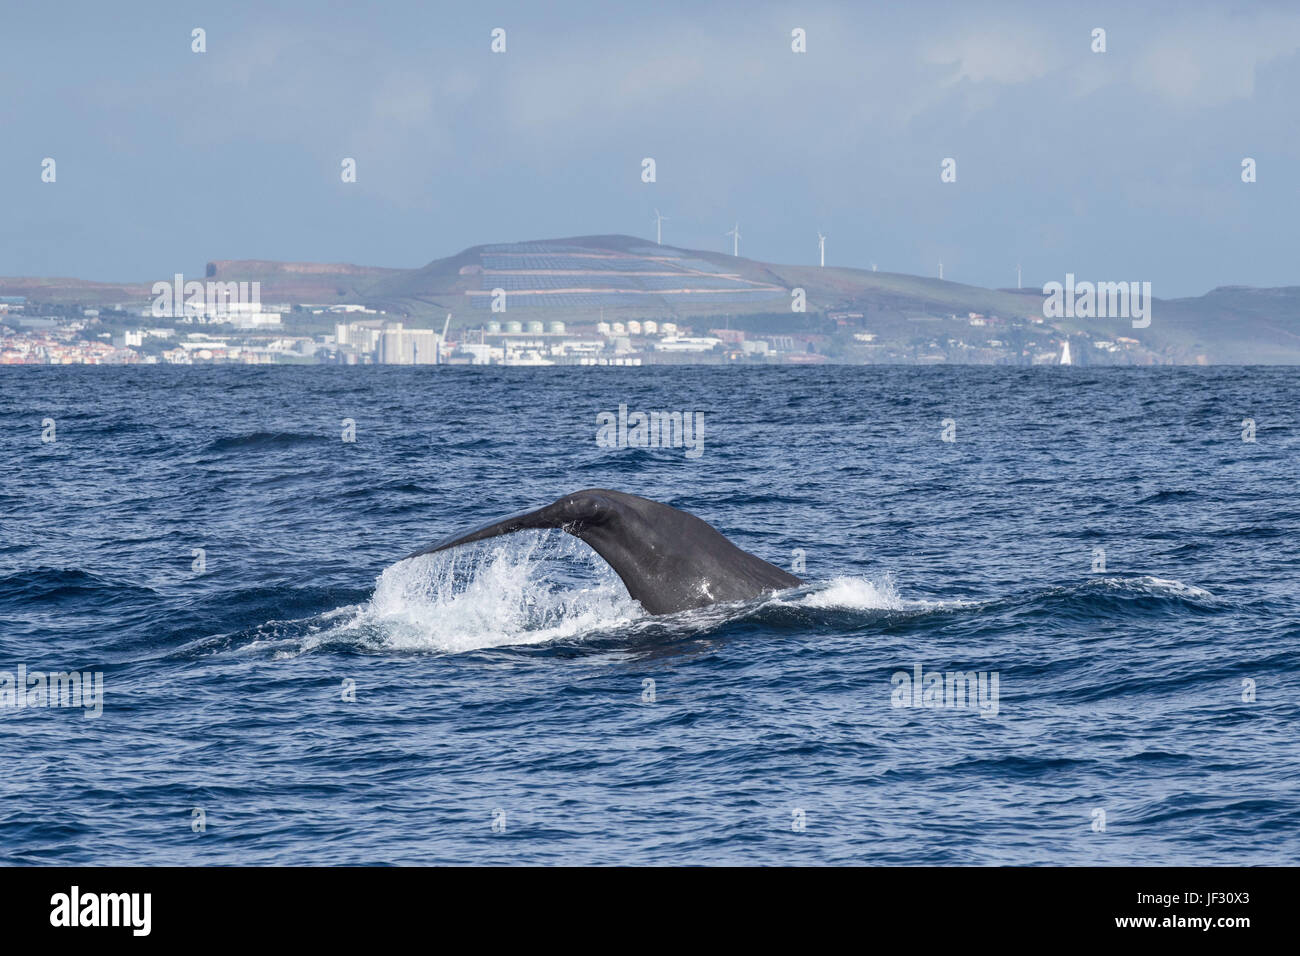 Female Sperm Whale, Physeter macrocephalus, or cachalot, fluking in front of Funchal, Madeira, North Atlantic Ocean Stock Photo